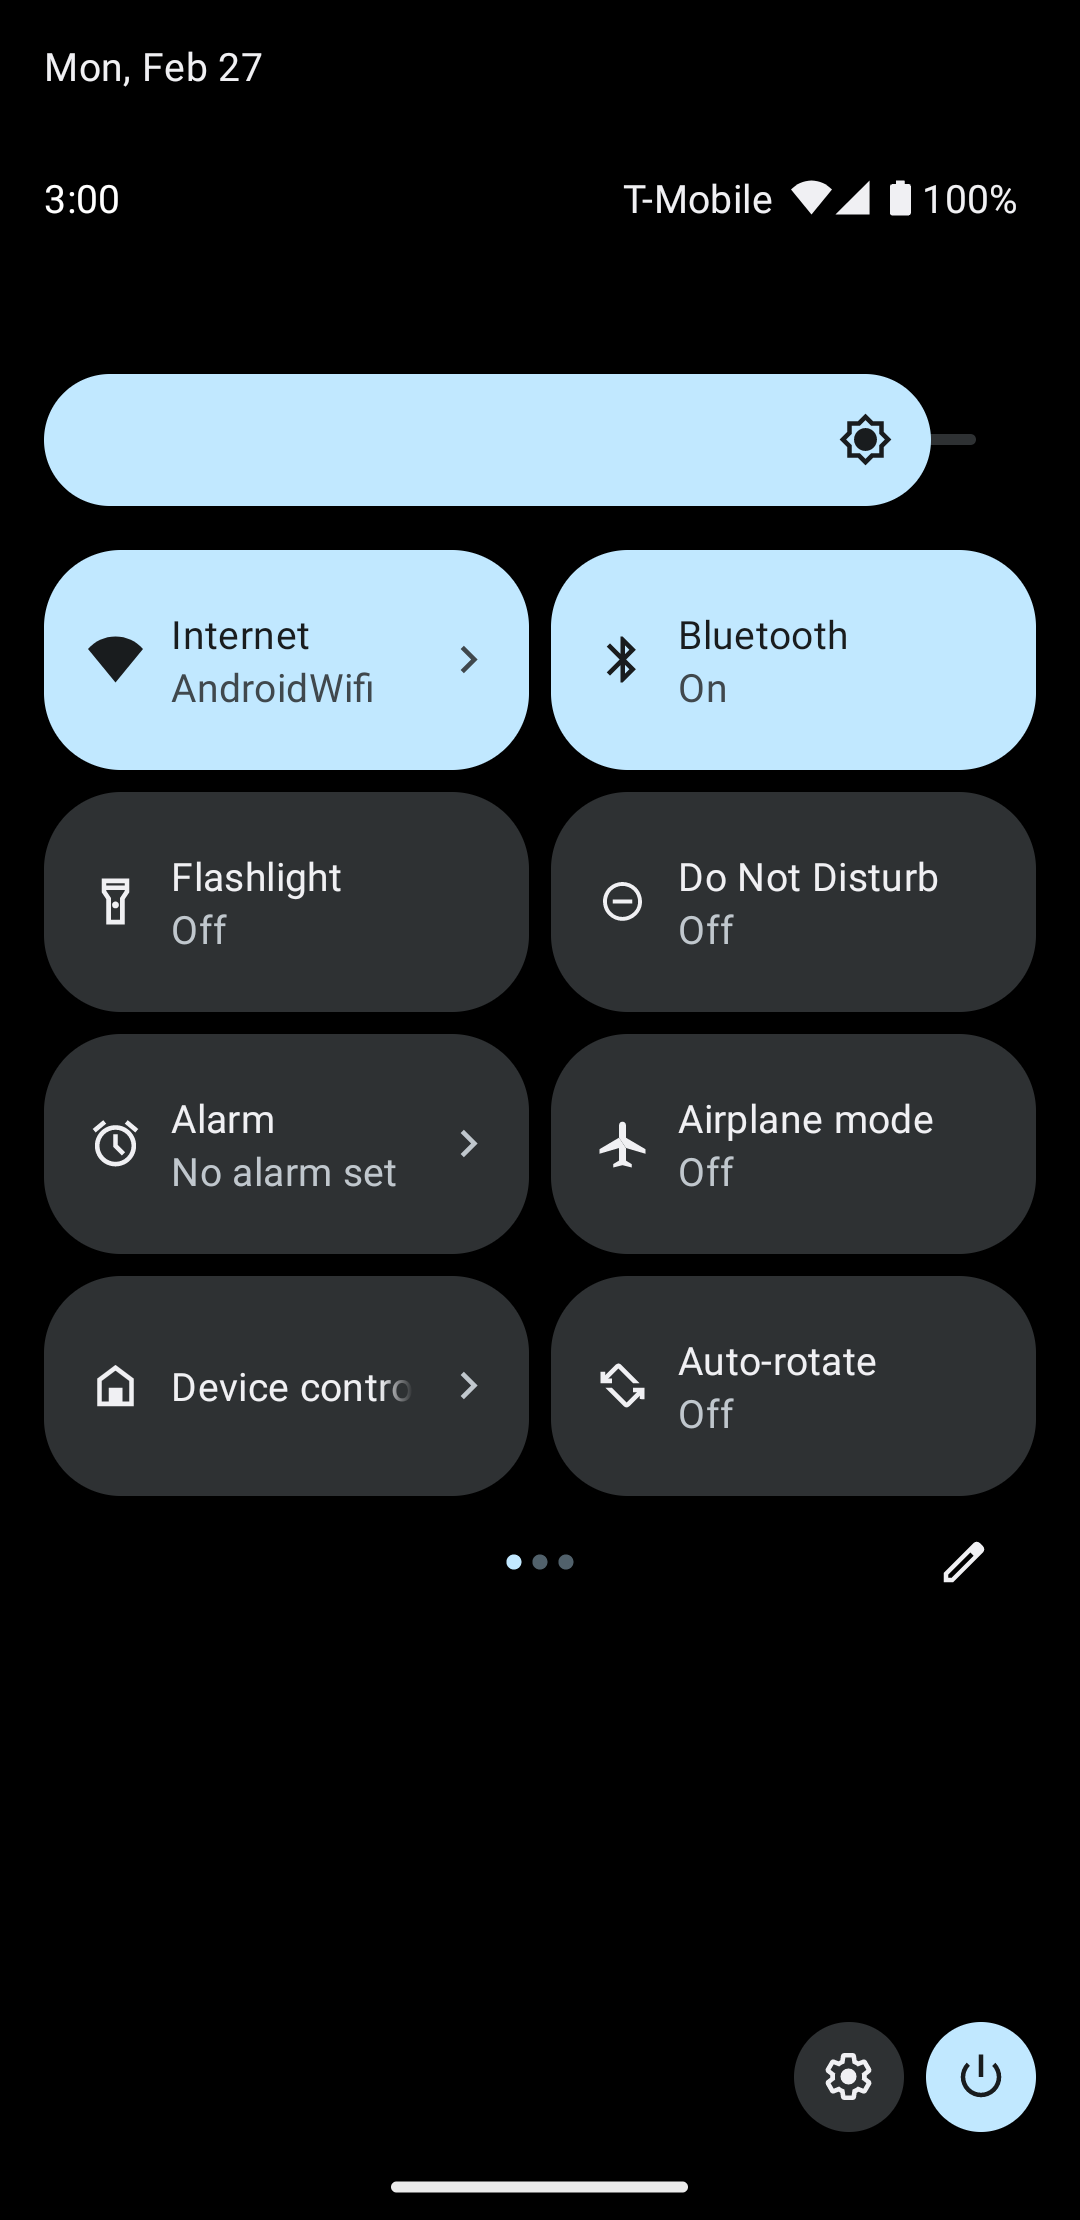 An image showing the system ui for device controls